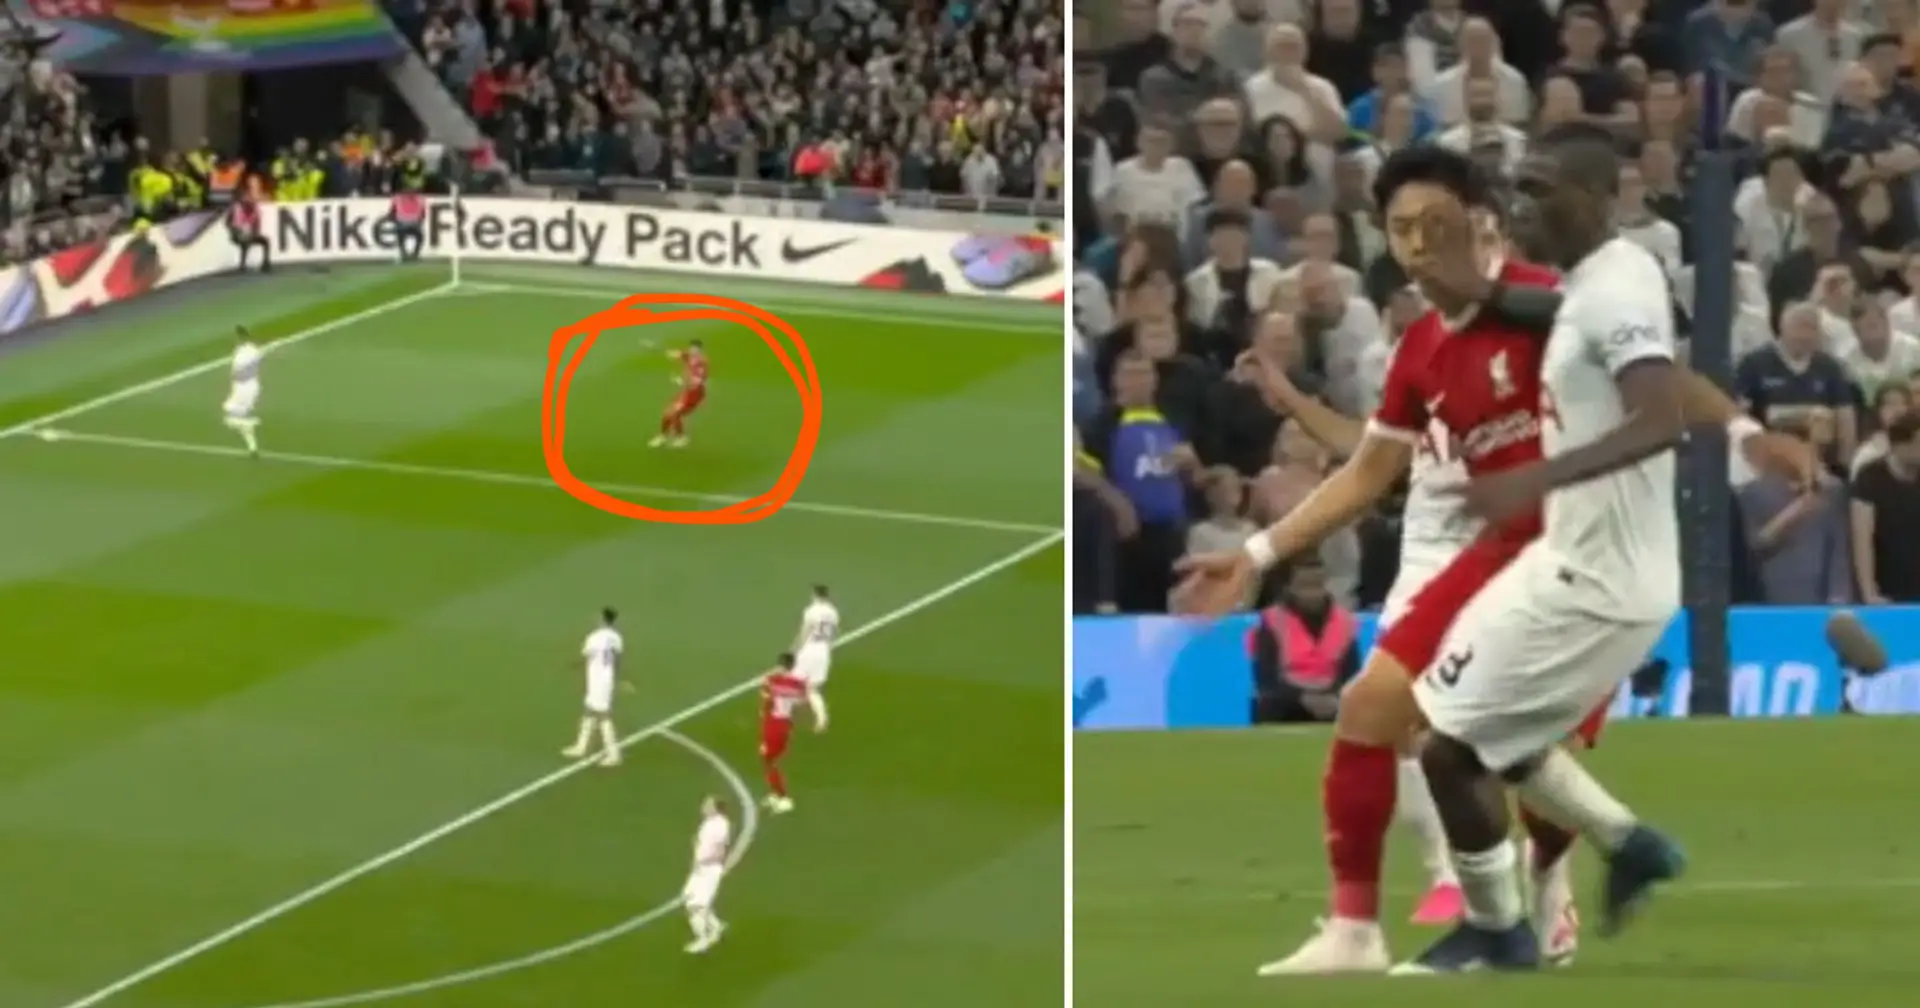 Ref Simon Hooper denies Liverpool corner kick at 88', only gives free-kick from 40 yards after - caught on camera